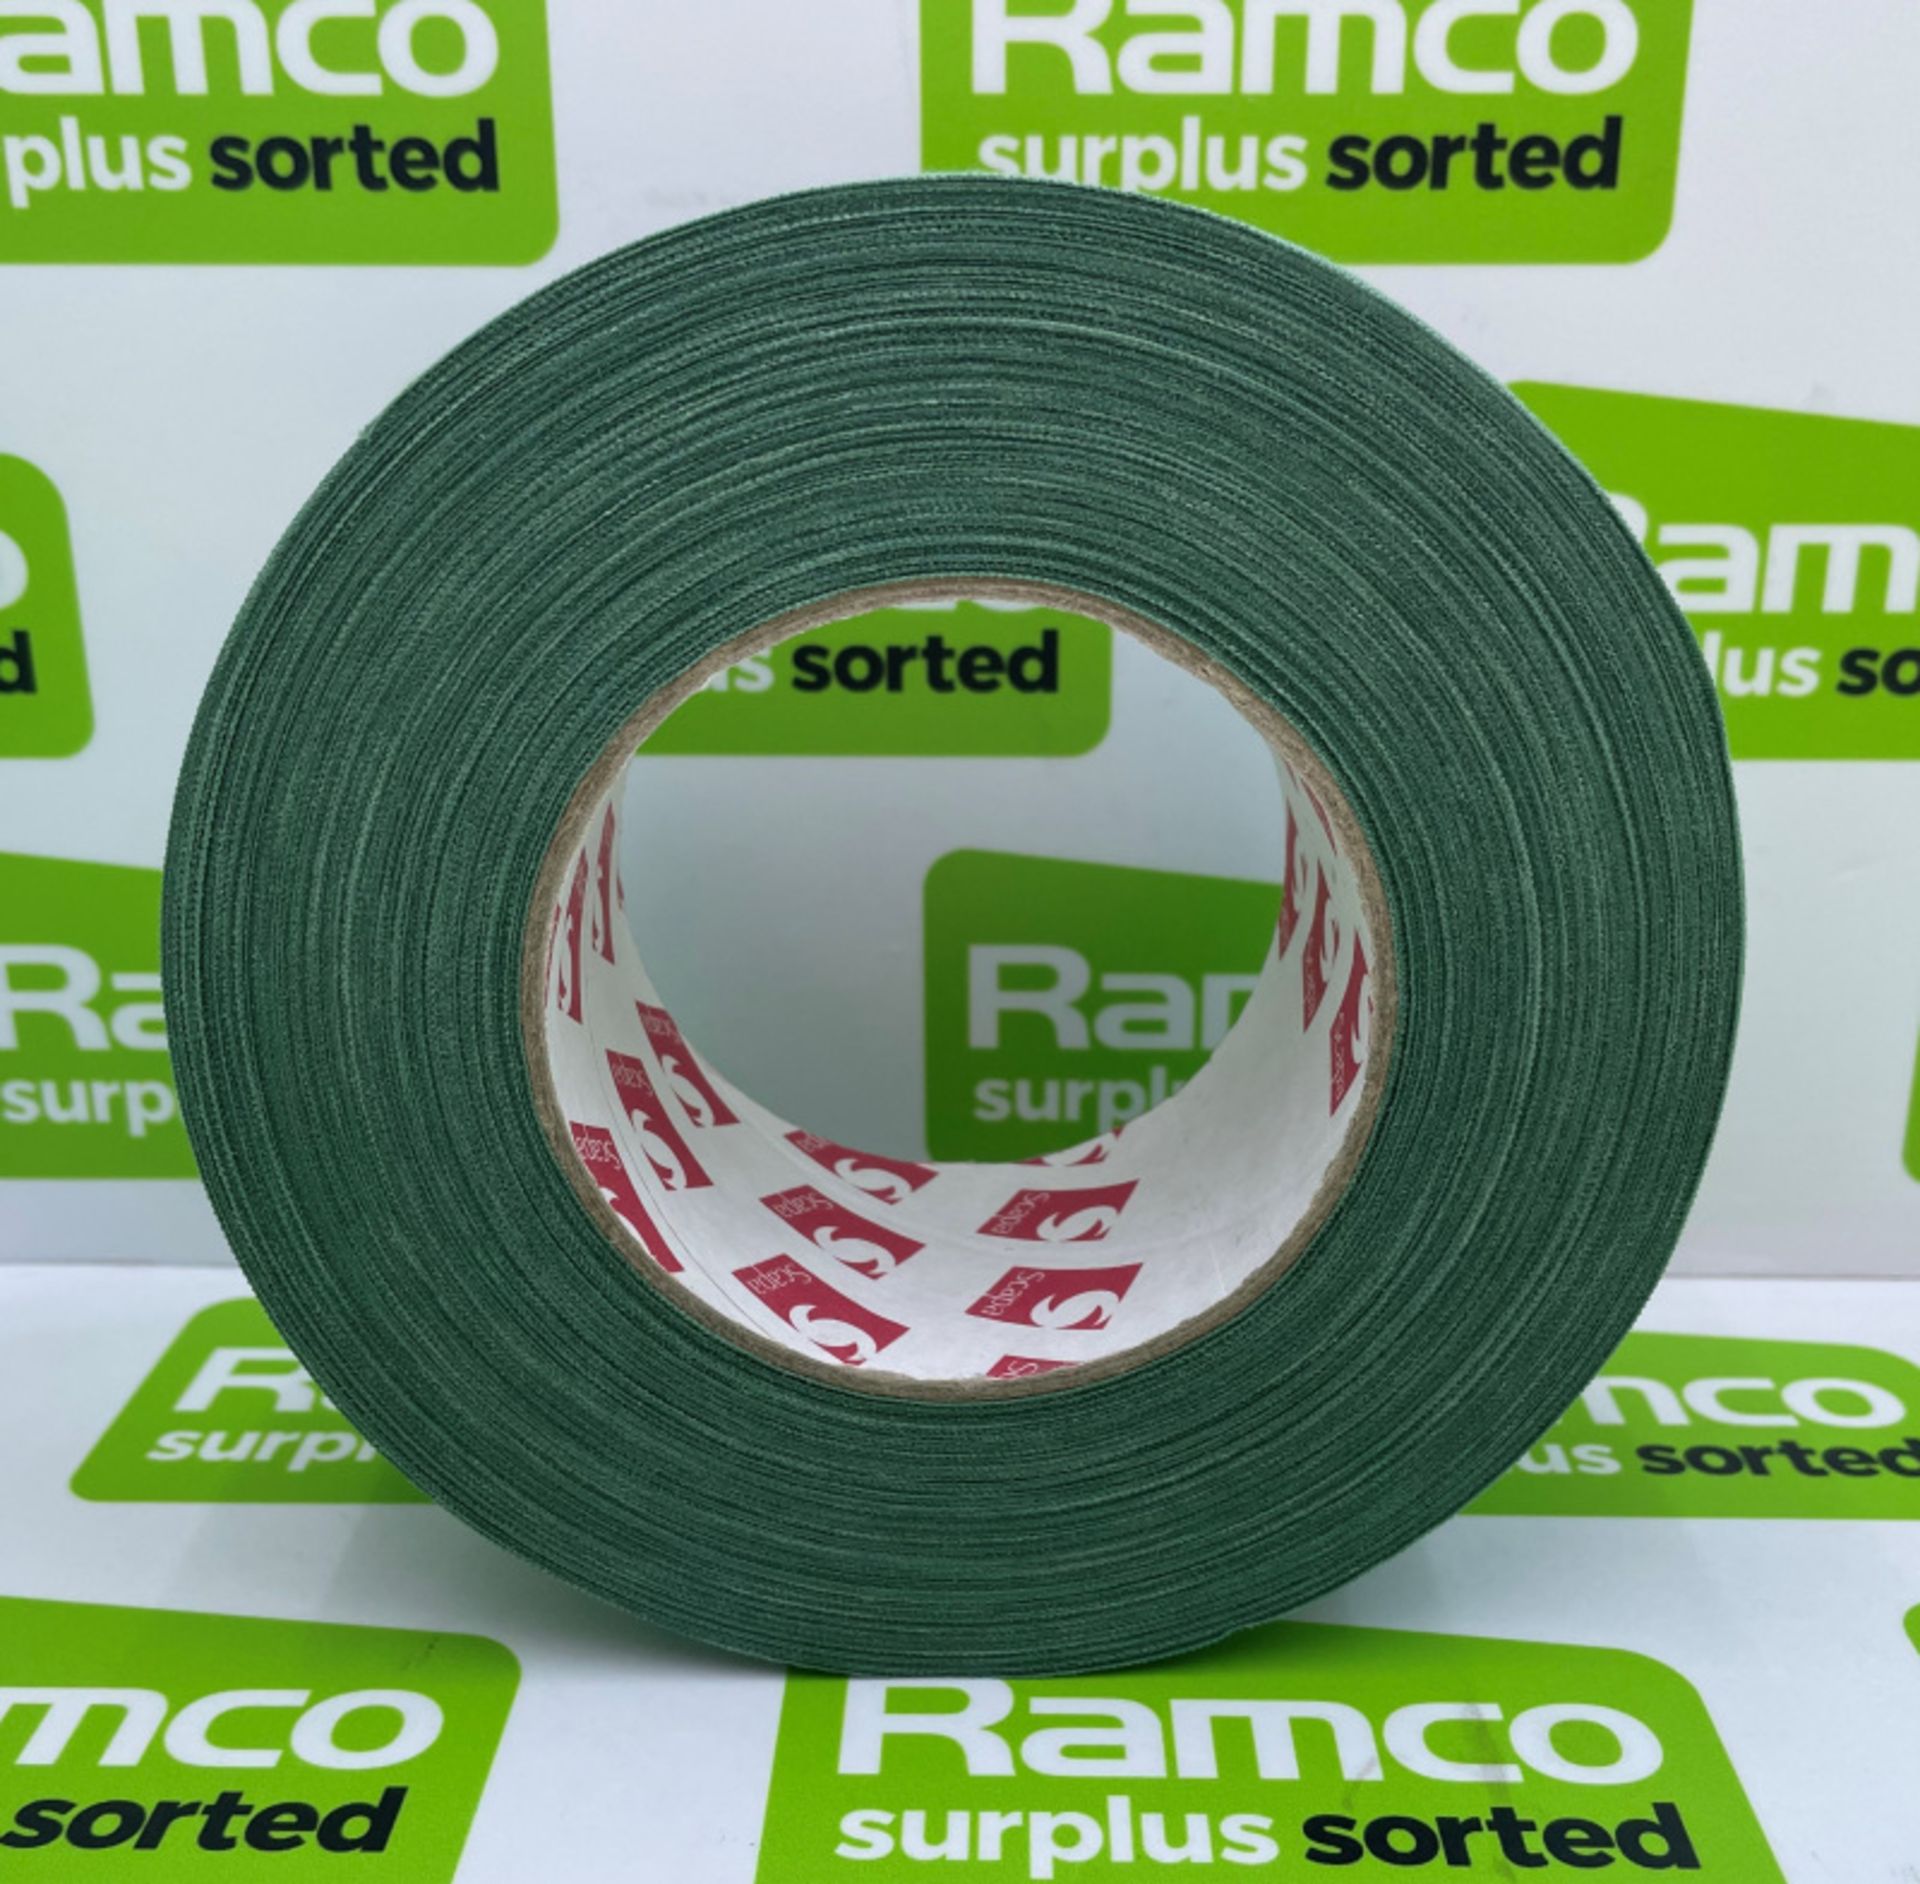 Scapa 3302 Tape - Olive Green - 50mm x 50M rolls - 16 rolls per box - 33 boxes - Image 3 of 7